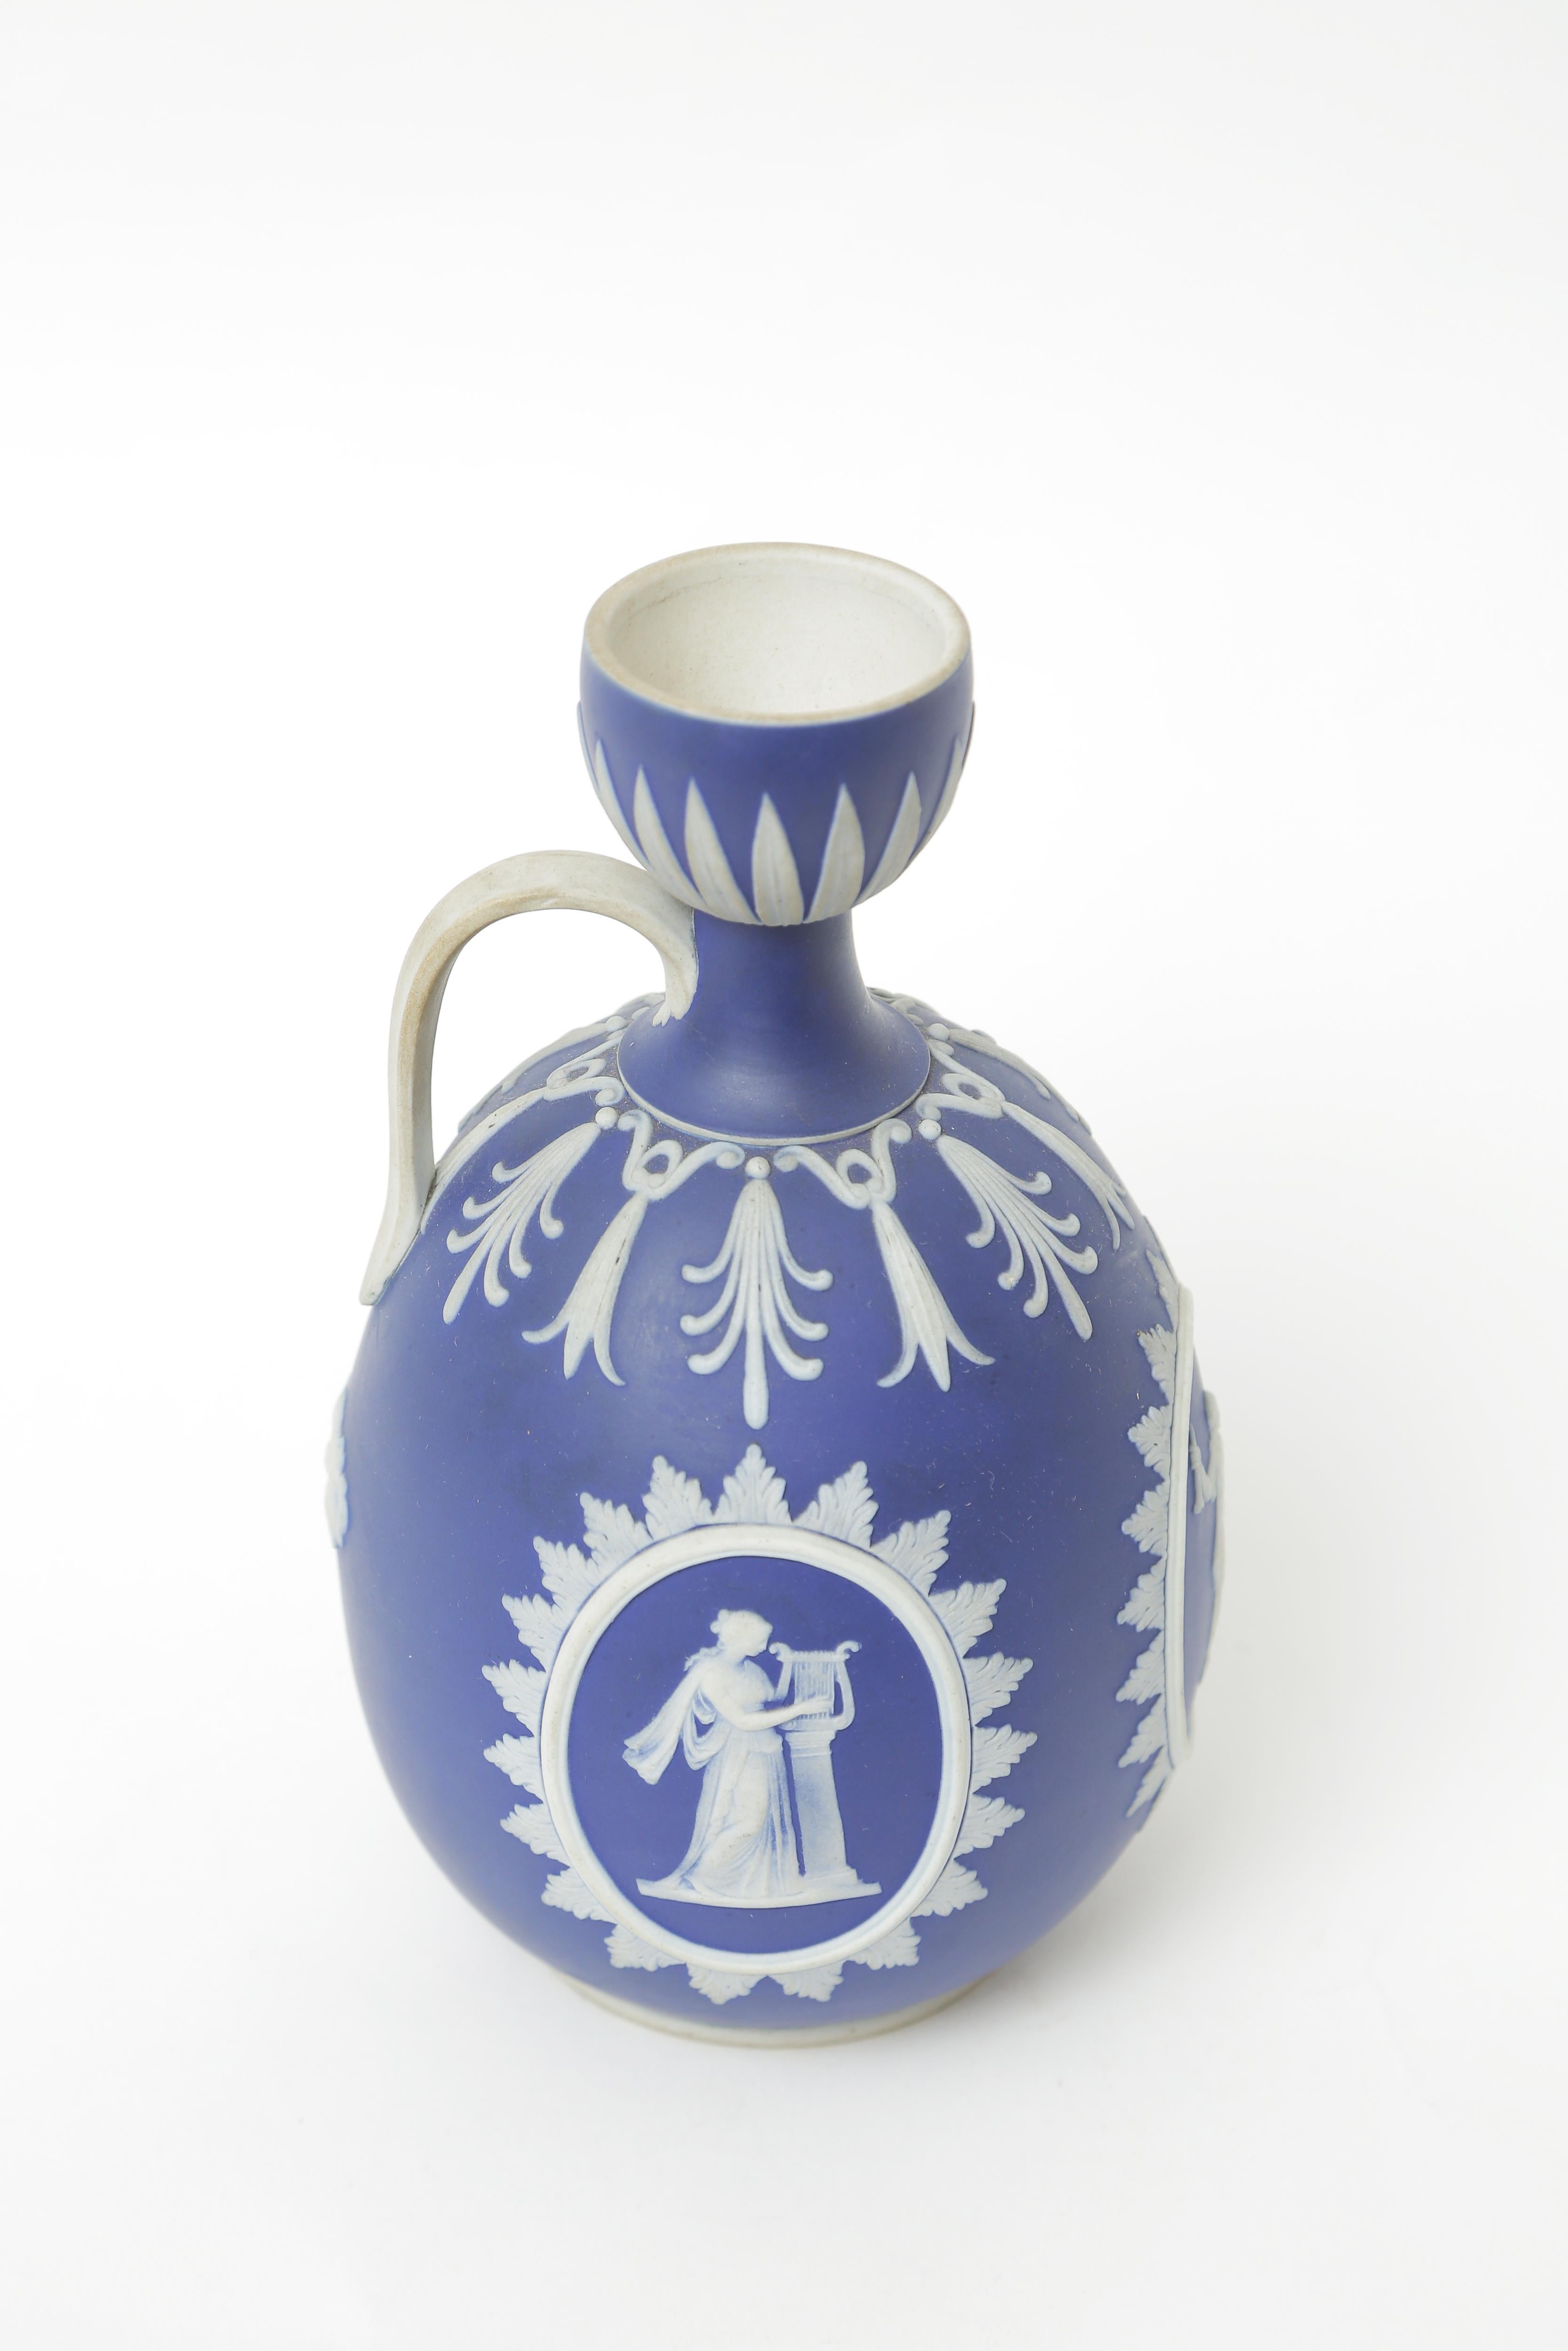 A Classic and elegant Wedgwood England piece with fine white jasperware relief on their dark blue or cobalt ground. This piece also features a single handle and nice shaped body.